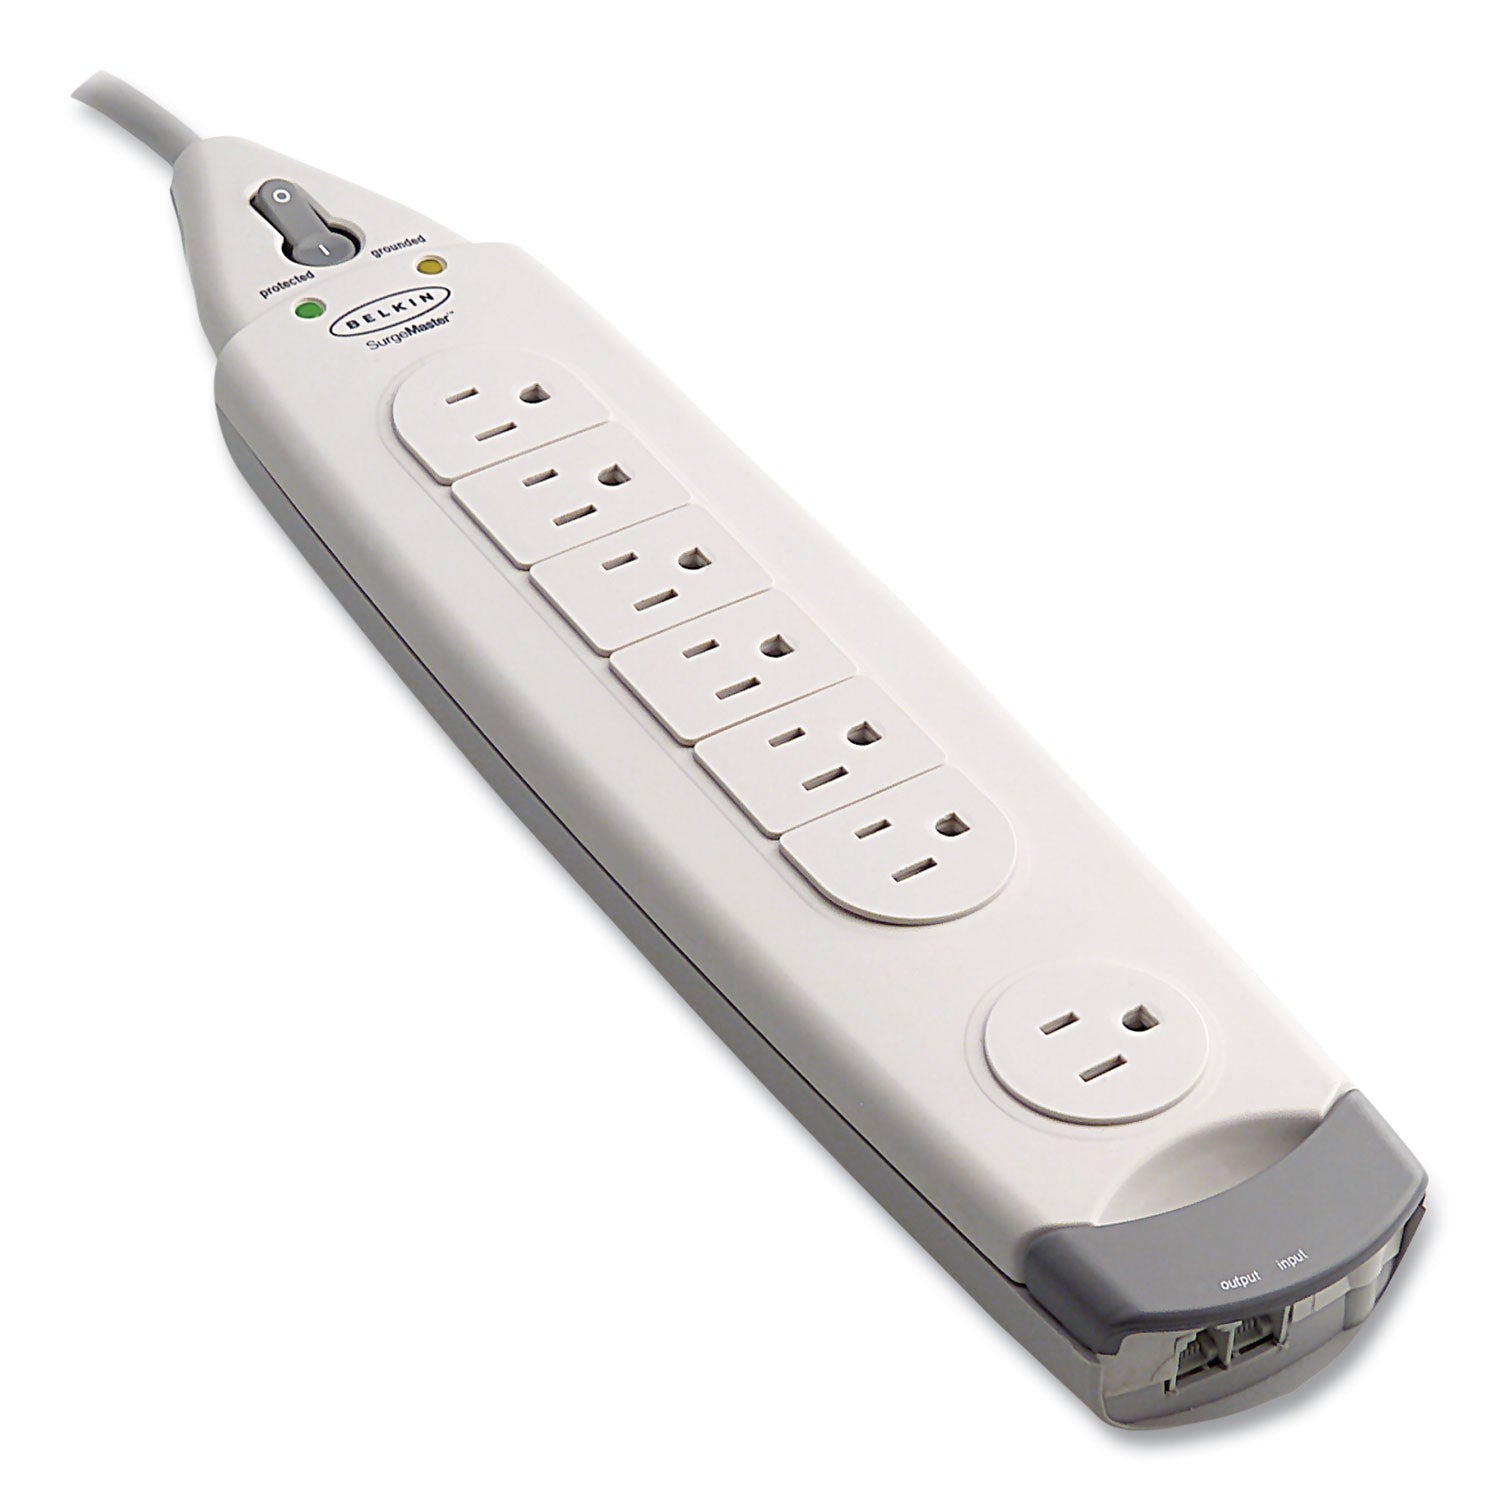 surgemaster-home-series-surge-protector-7-ac-outlets-12-ft-cord-1045-j-white_blkf9h71012 - 3